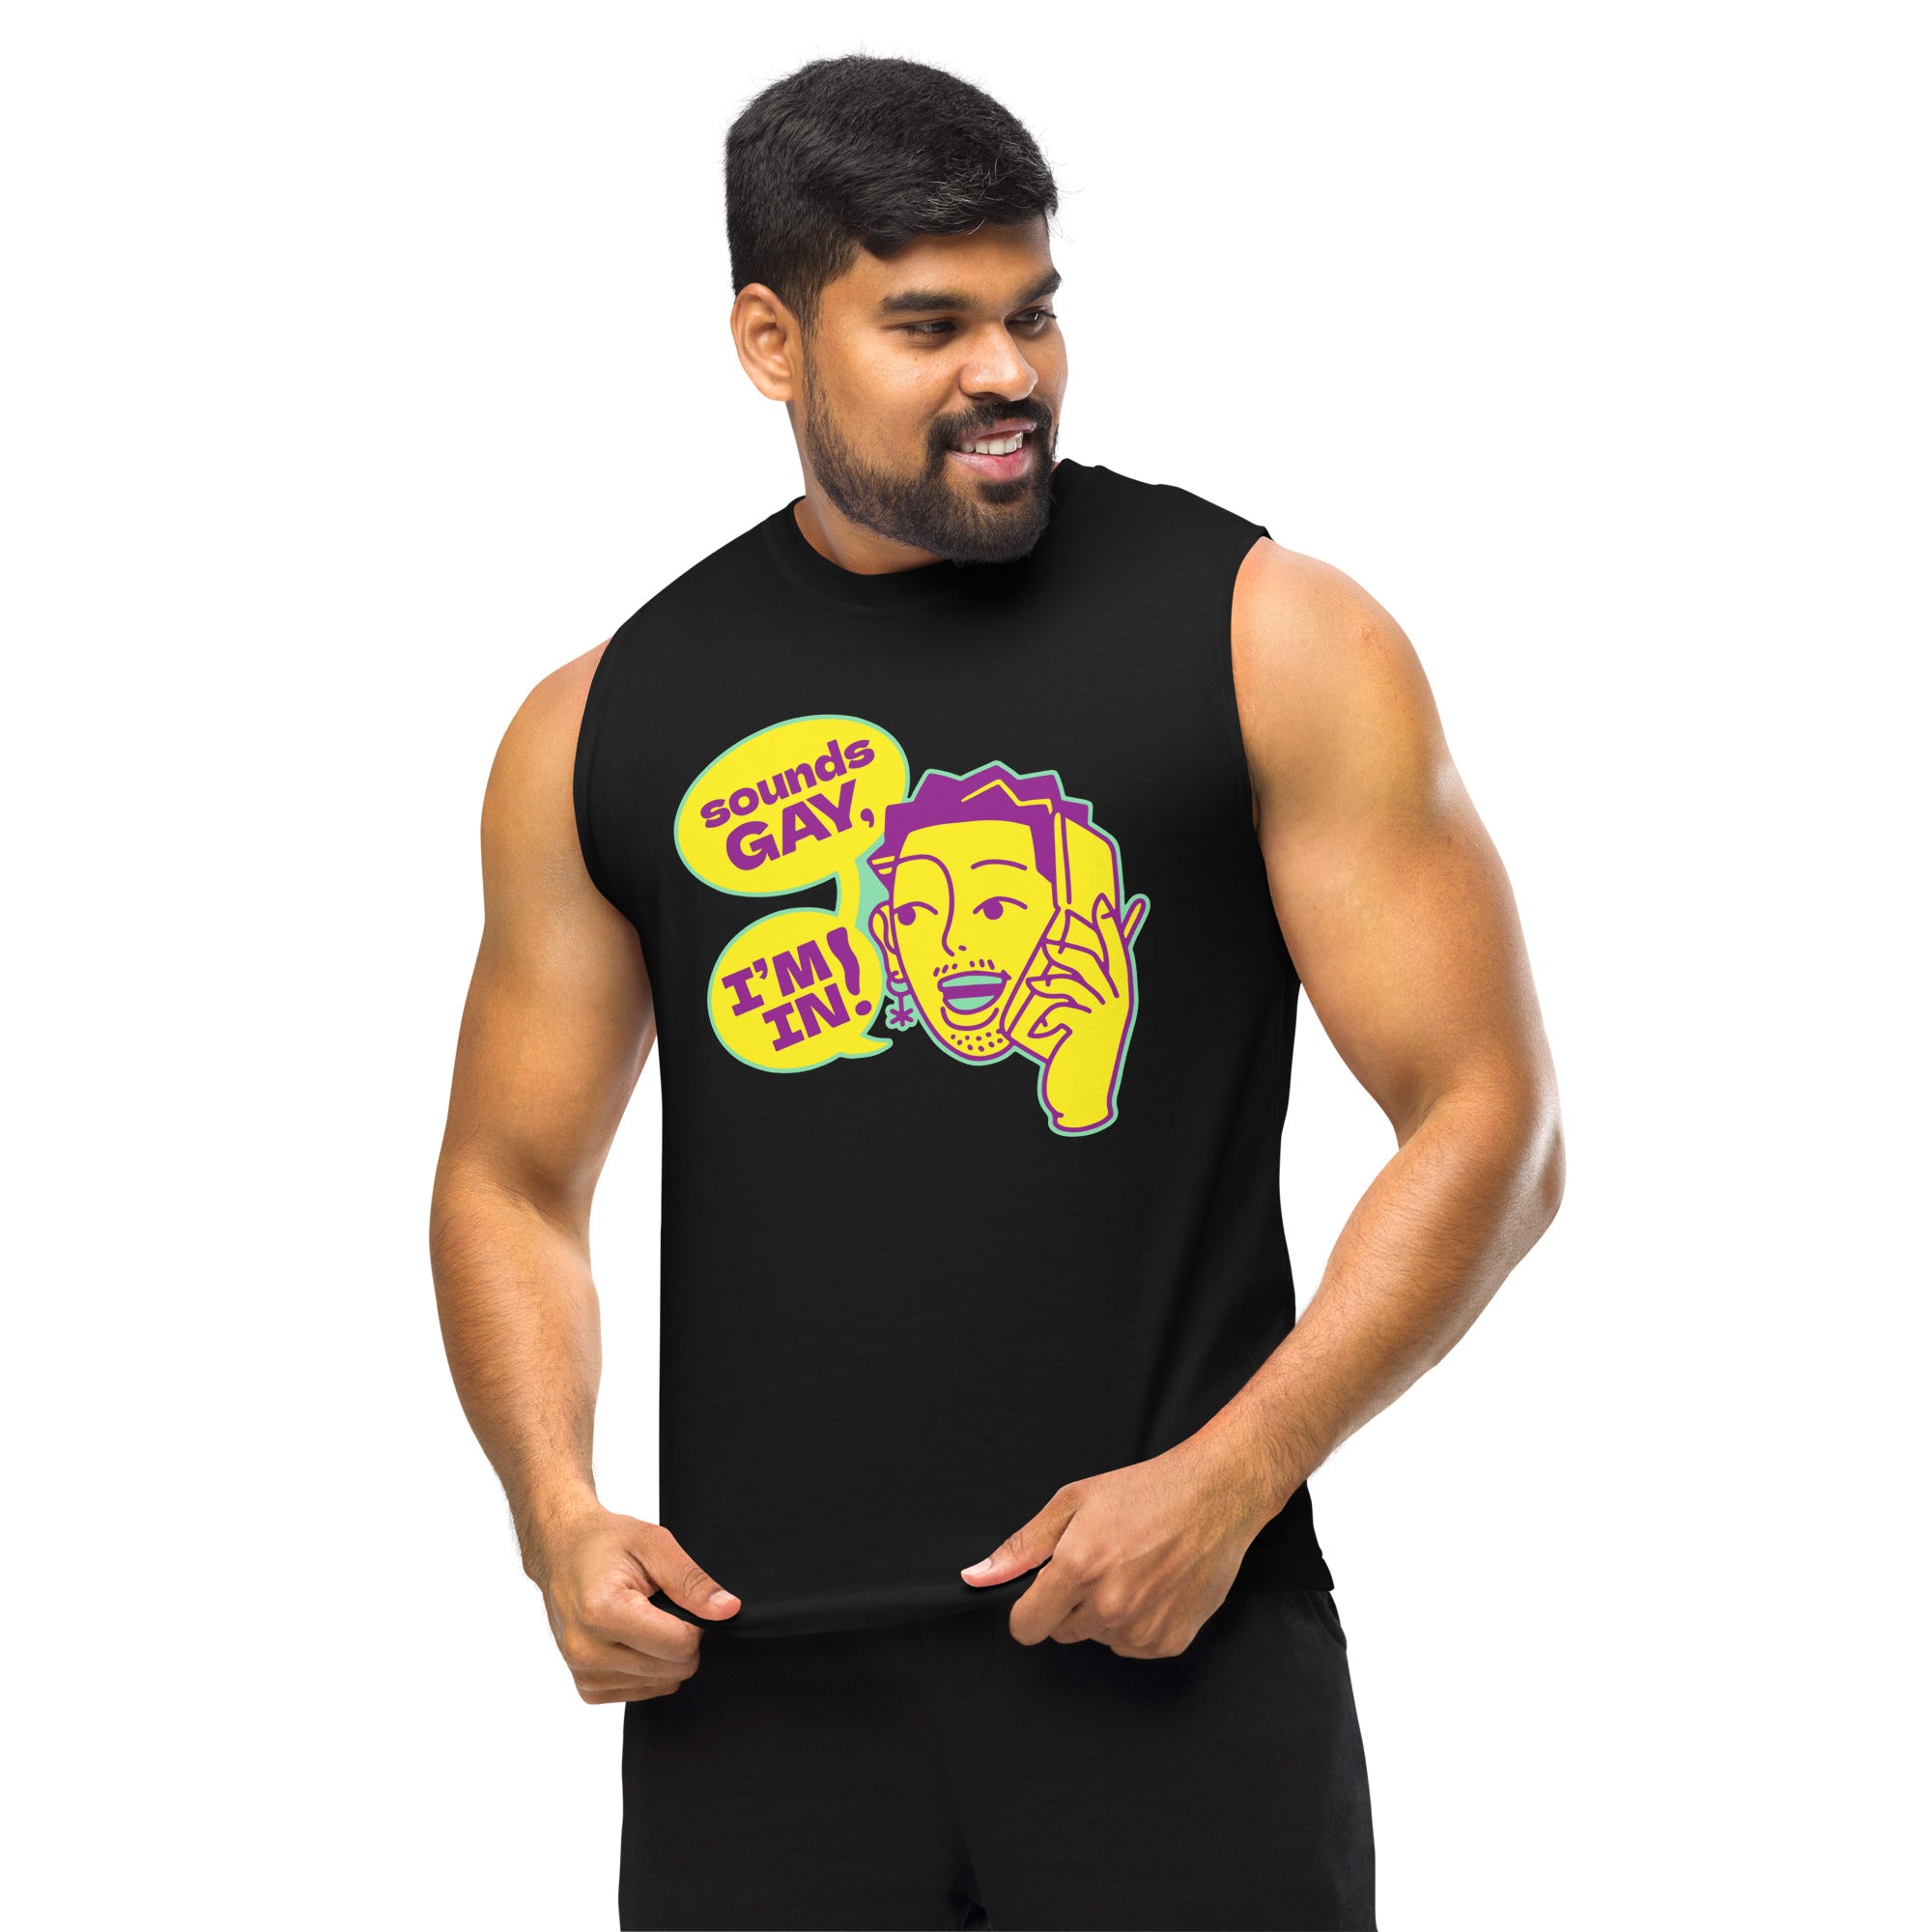 Sounds Gay - Muscle Shirt